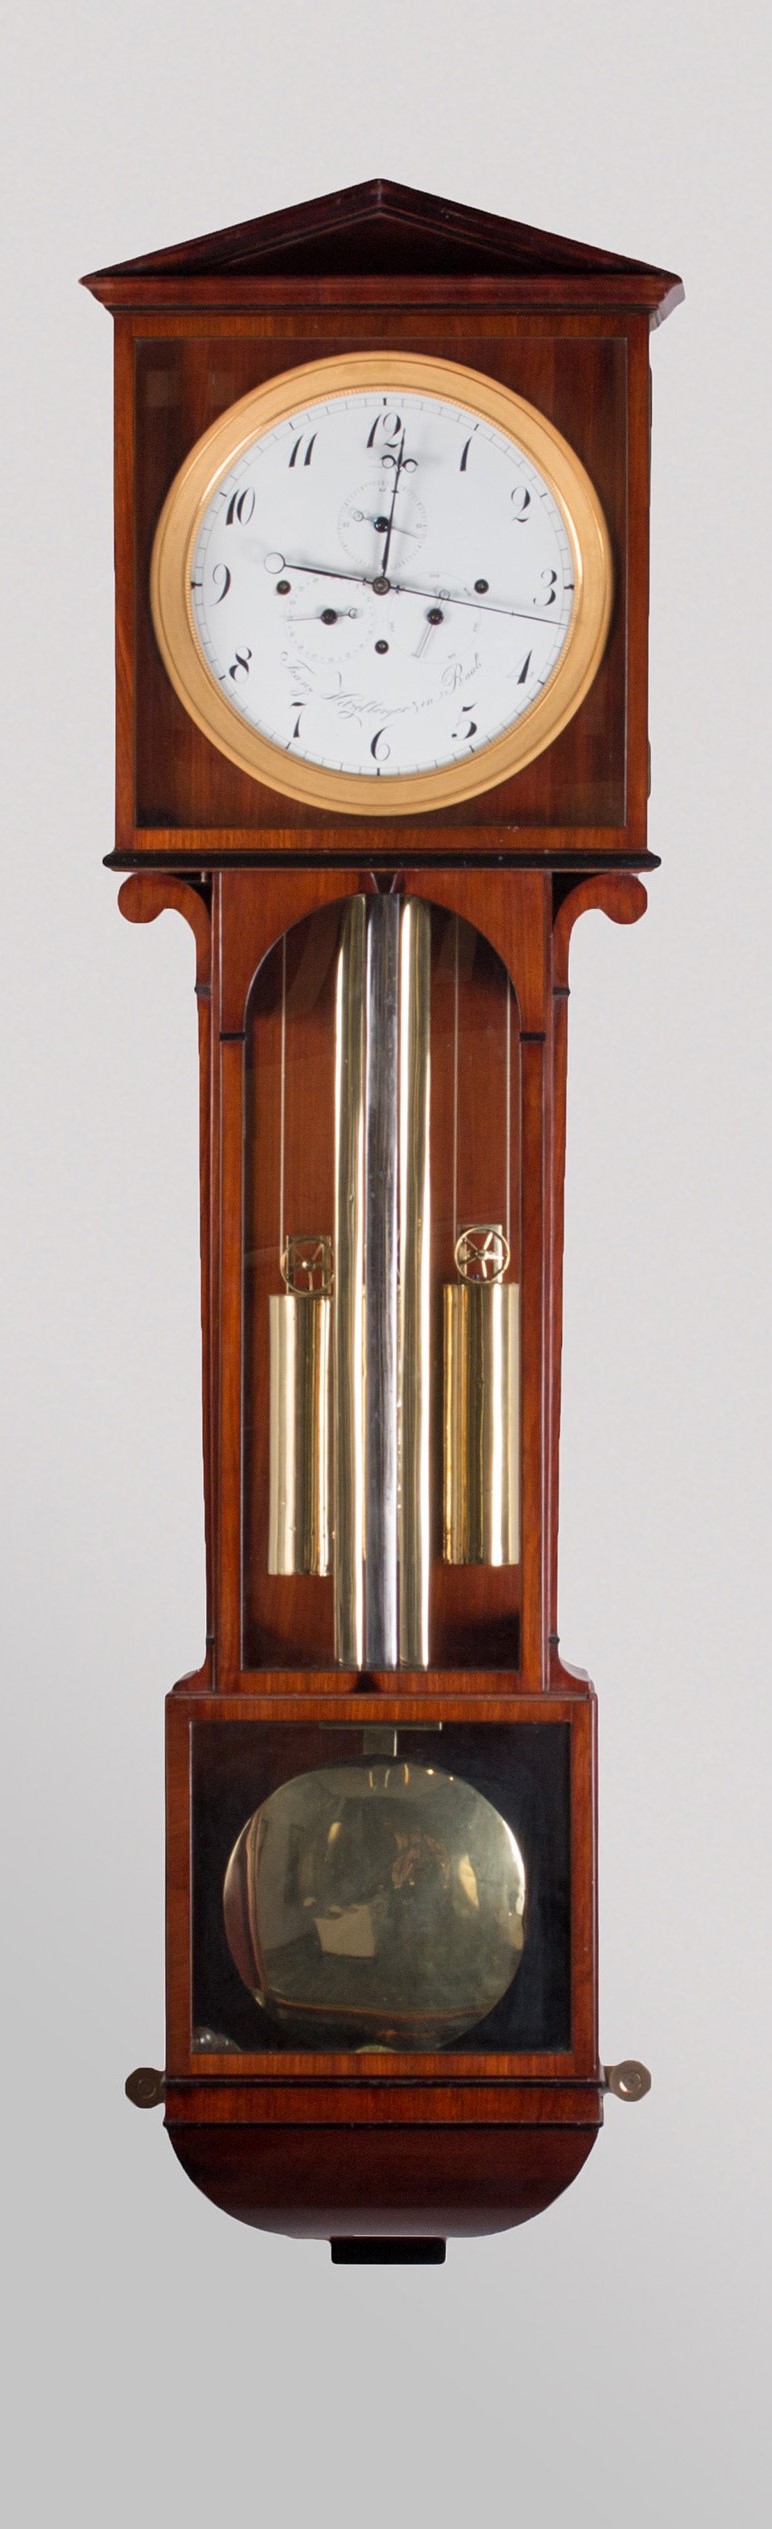 Astronomical Laterndl clock by Franz Hitzelberger with 8 days duration, c. 1825.